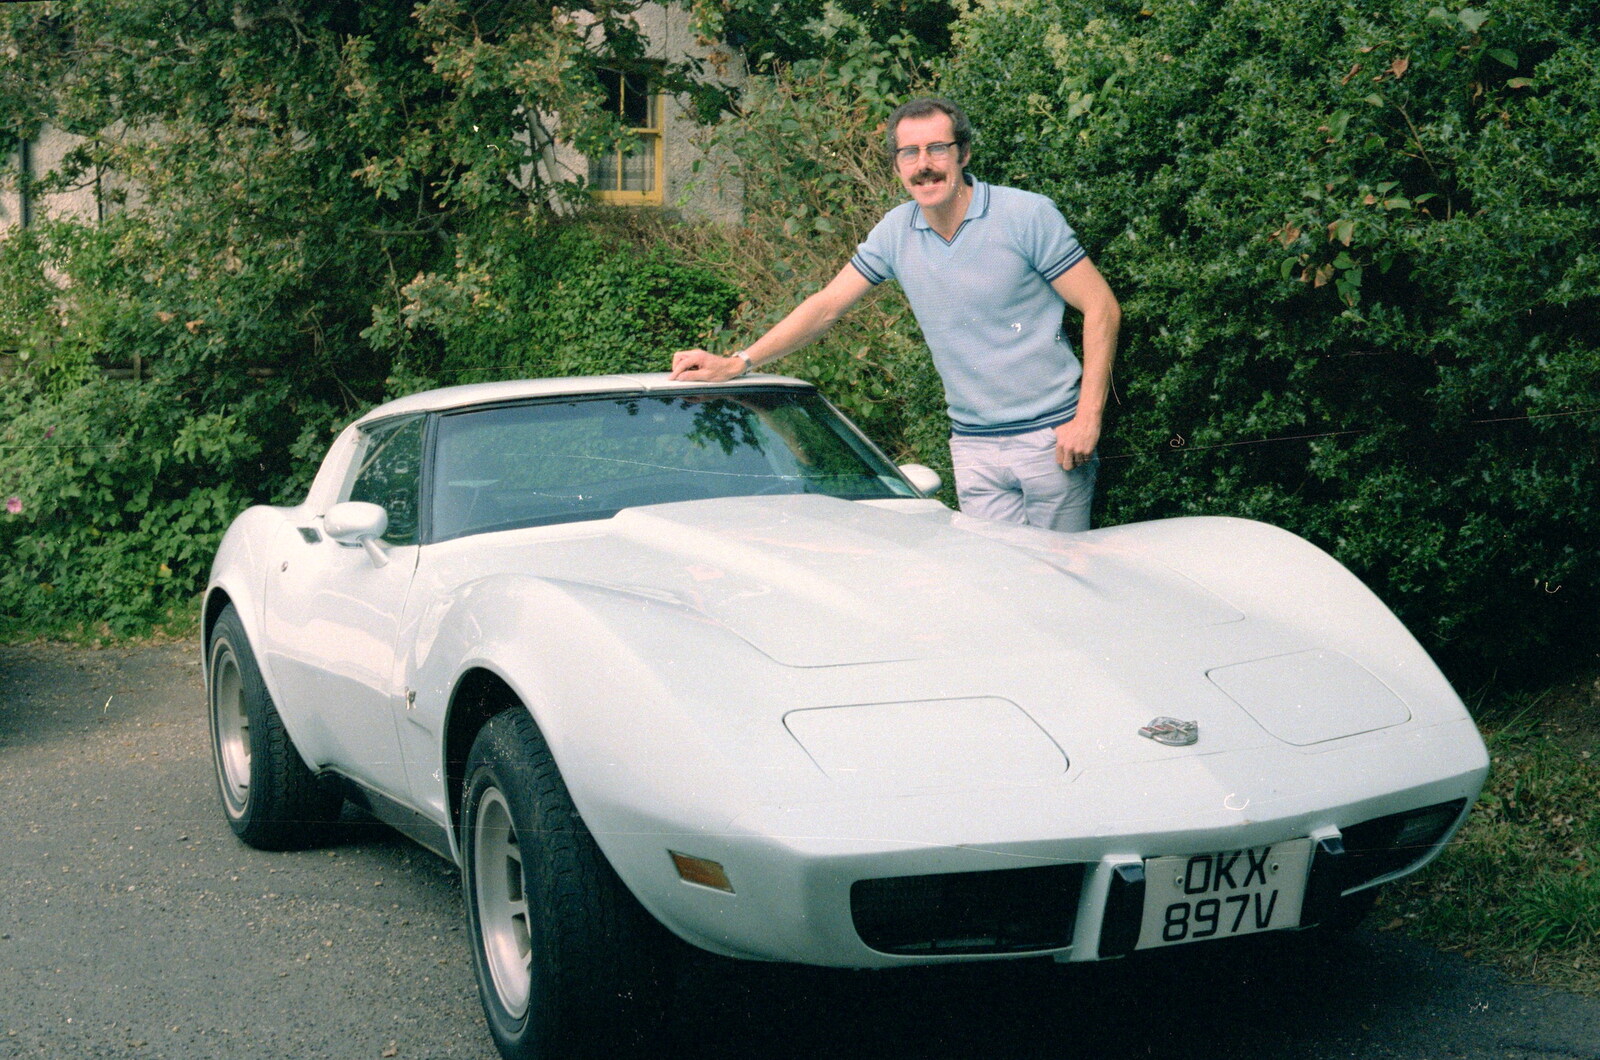 Brian with his Corvette from The Last Day of Term, and Leaving New Milton, Hampshire - 18th September 1985